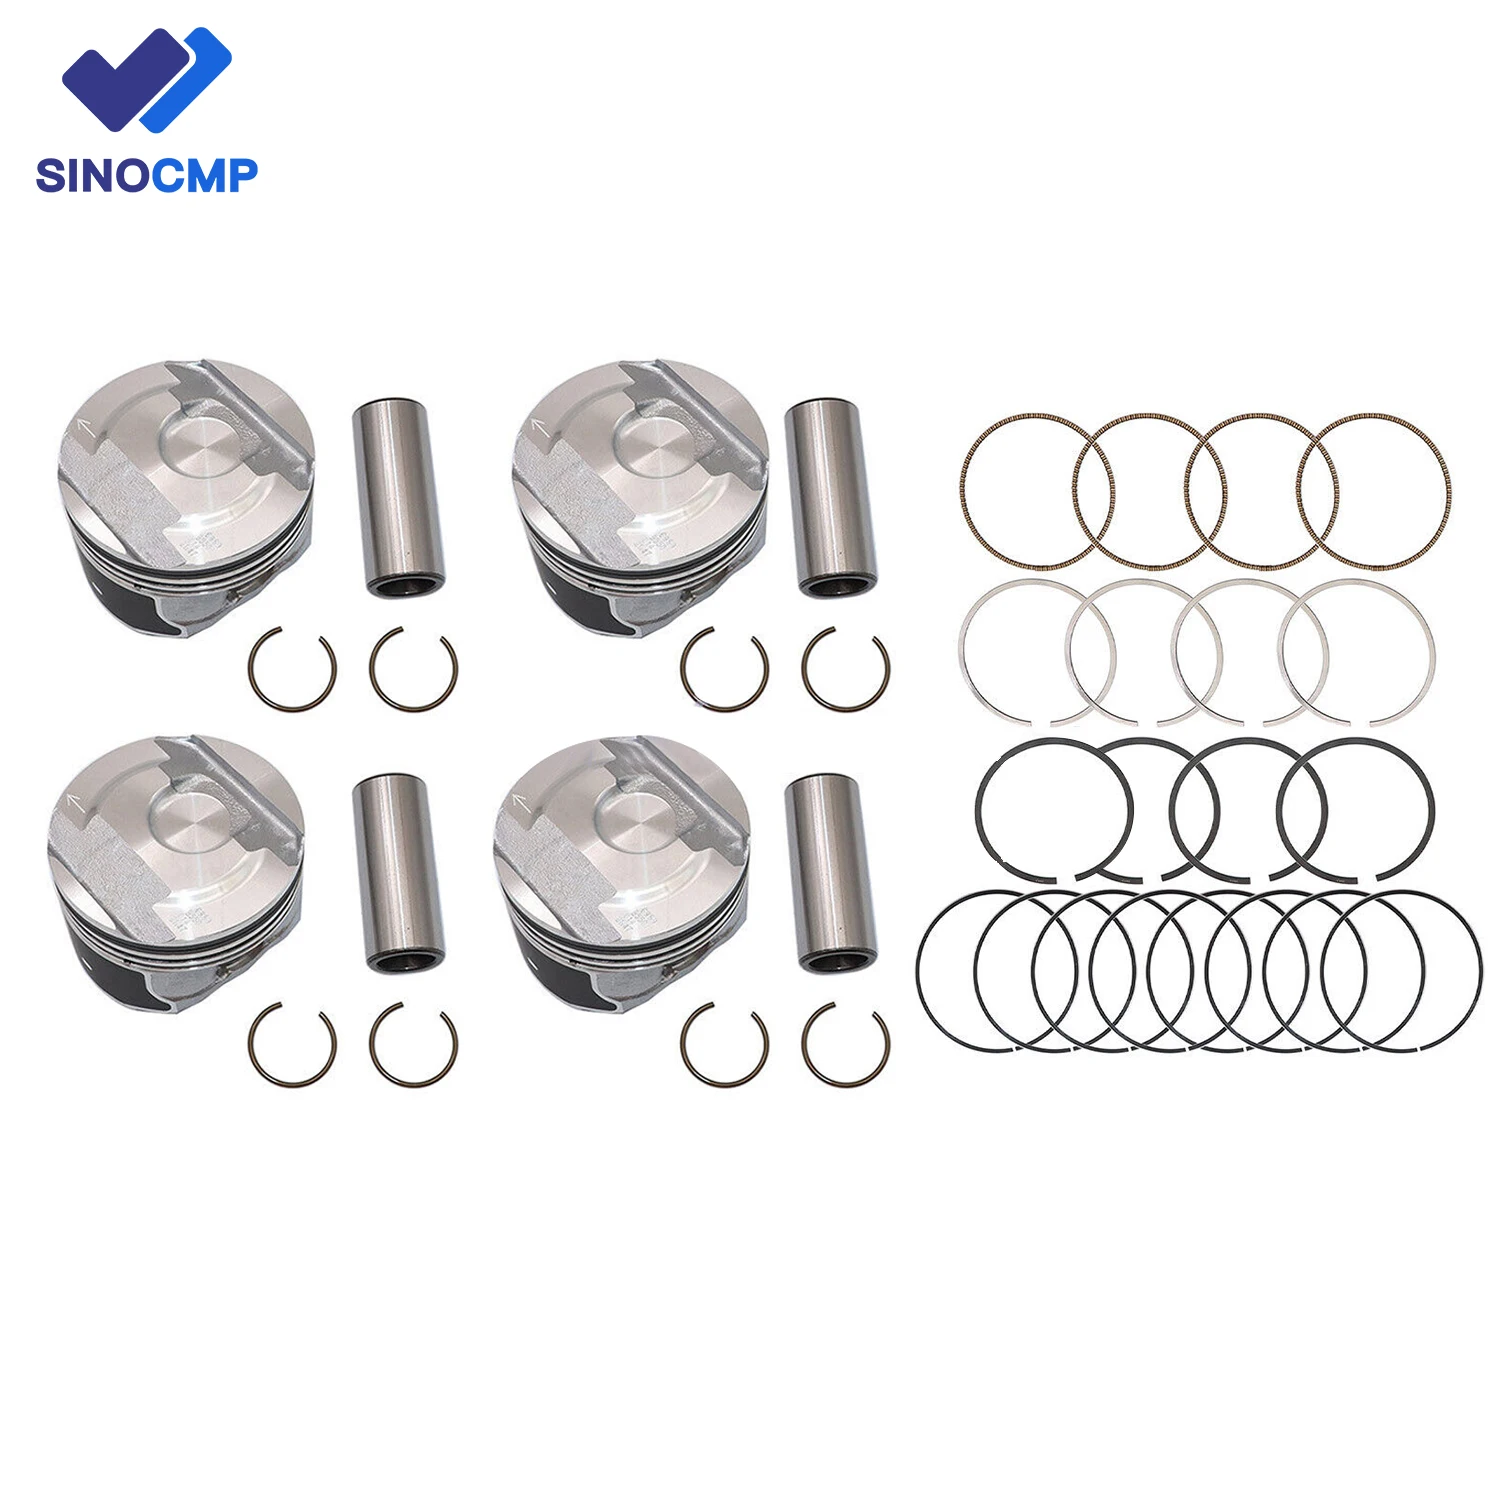 

12569638 12652809 89018107 19180831 12683808 Engine Pistons & Rings Kit Fit For Buick GL8 ES Cadillac ATS XT5 Chevrolet 2.0L